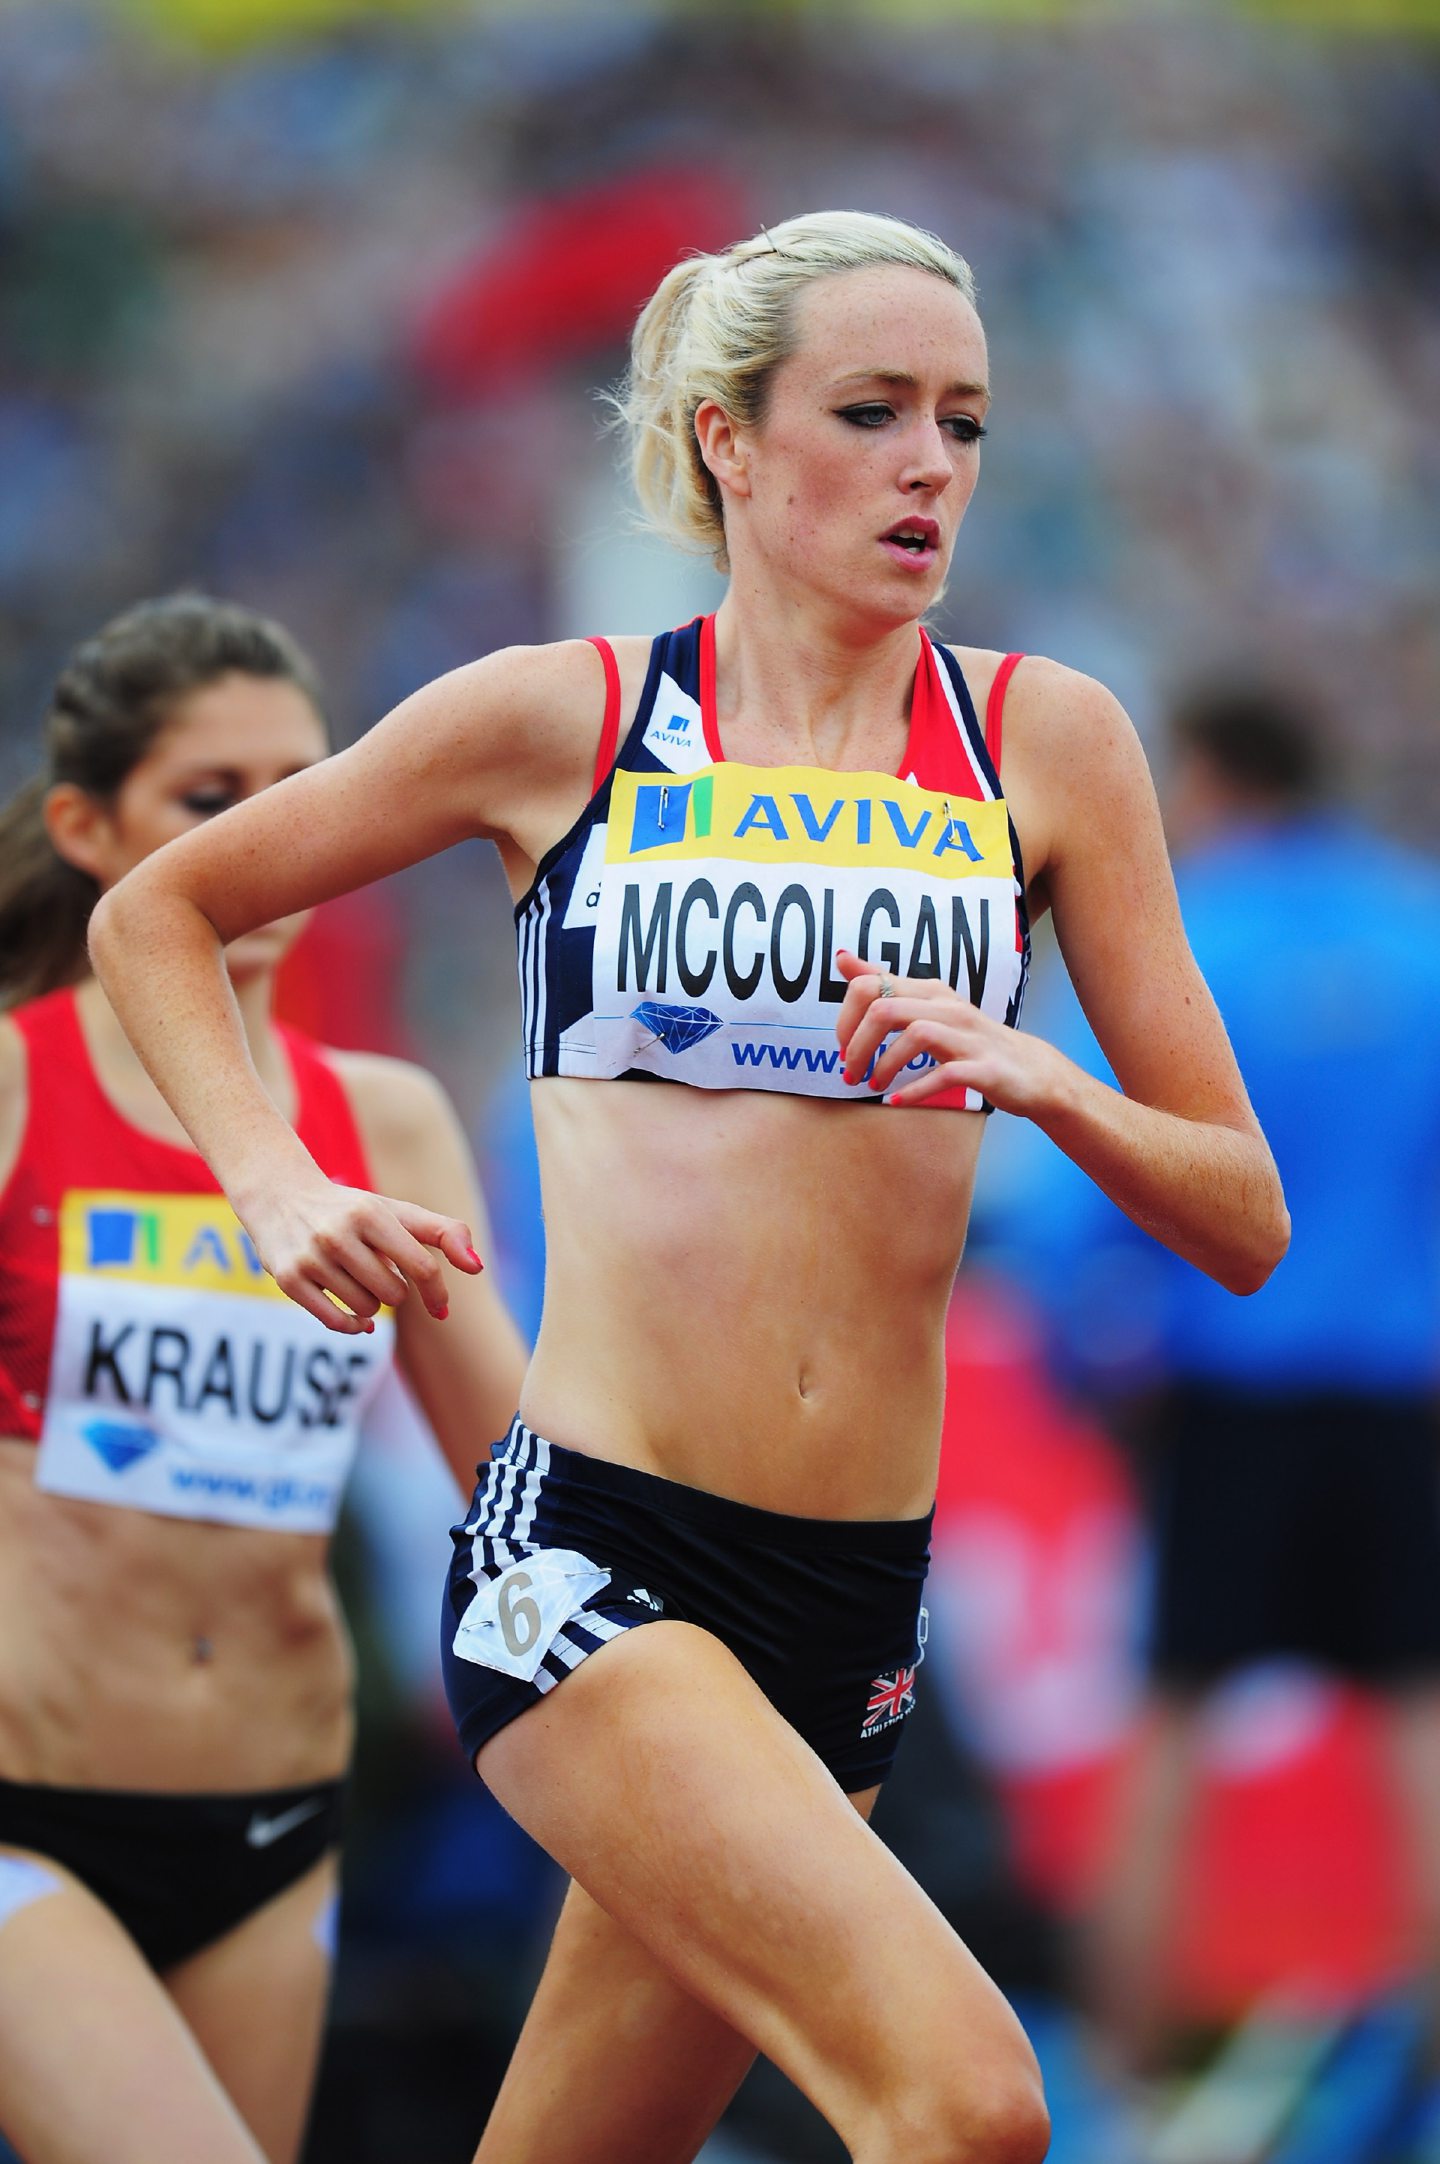 The Scot pictured ahead of London 2012.